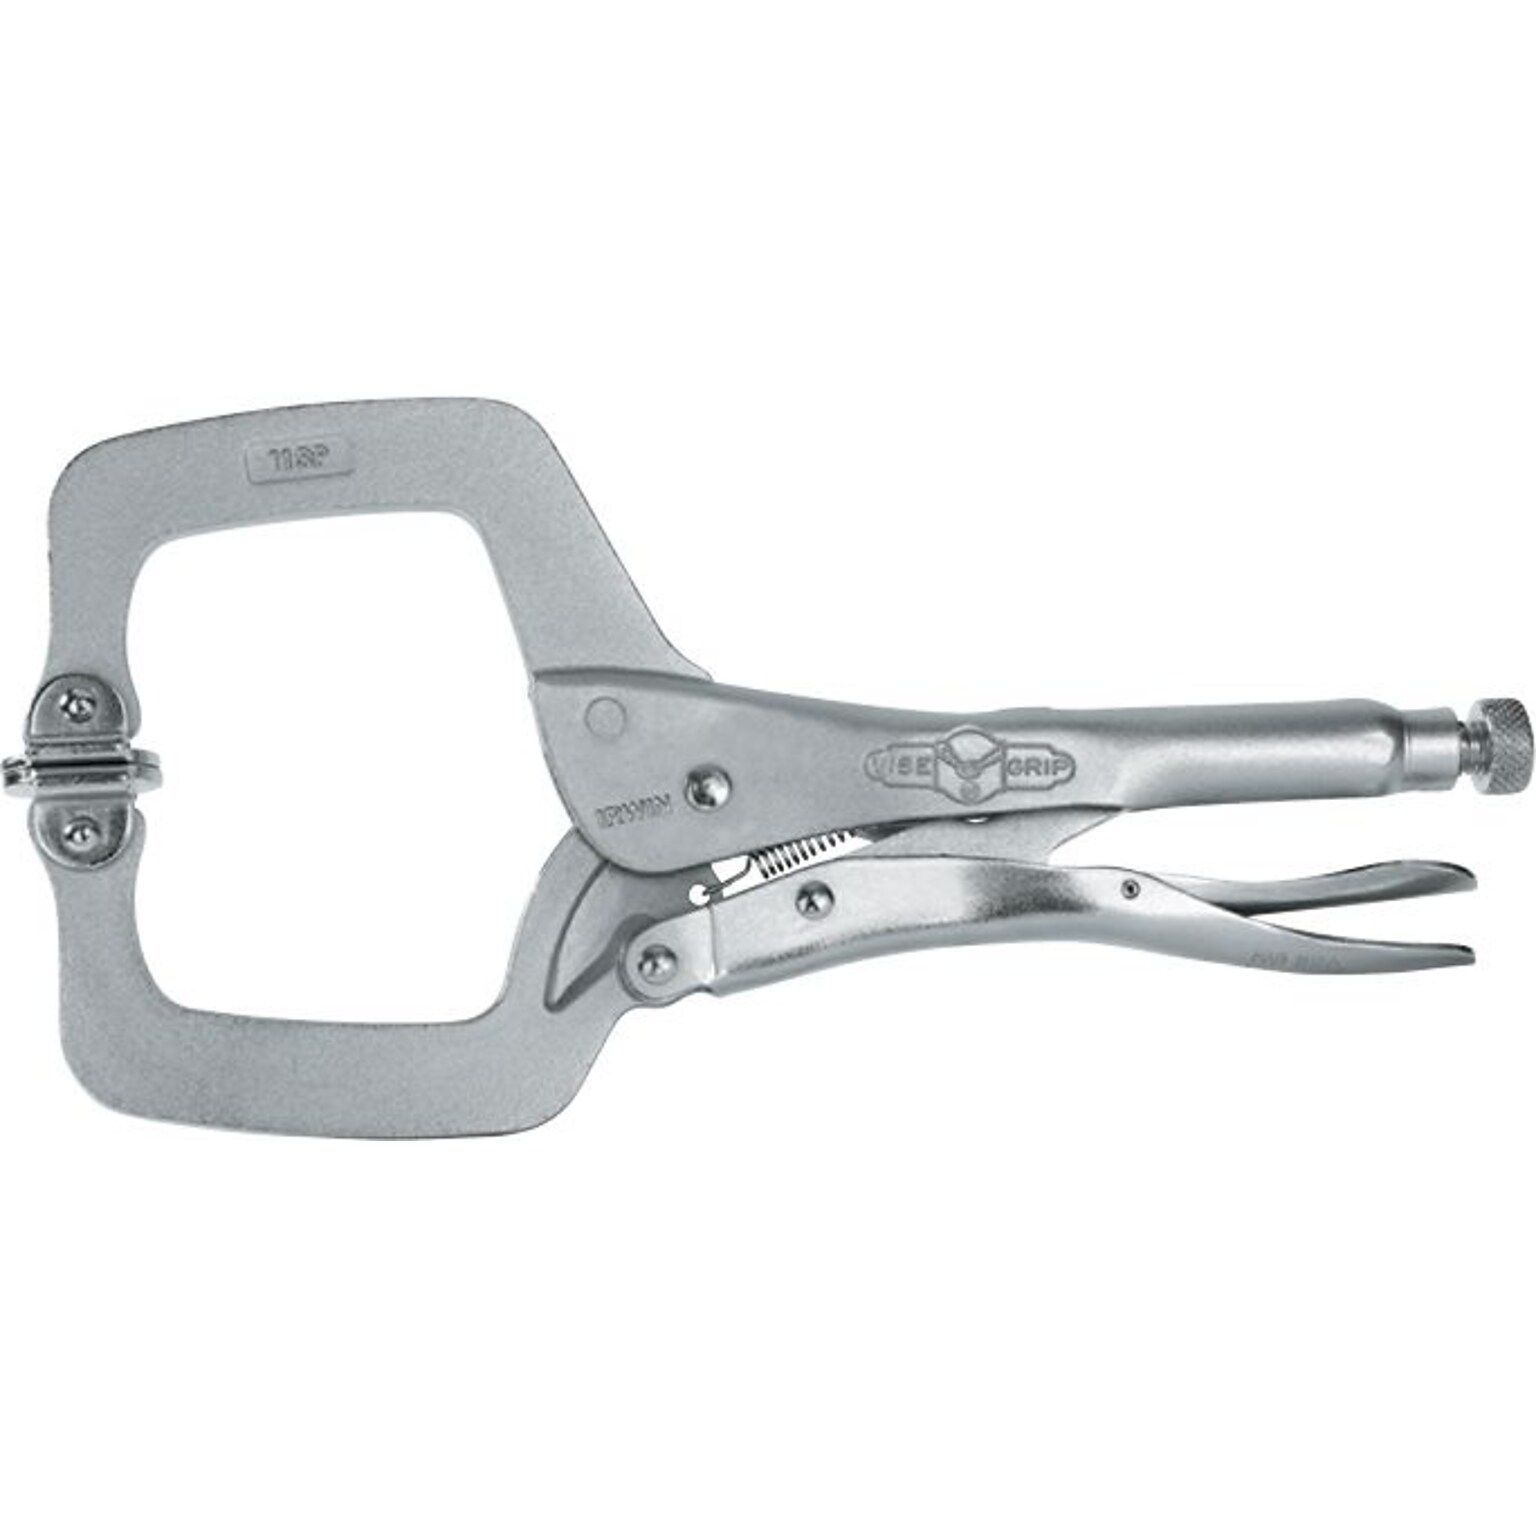 Irwin® Vise-Grip® Locking C-Clamps with Swivel Pads, 4